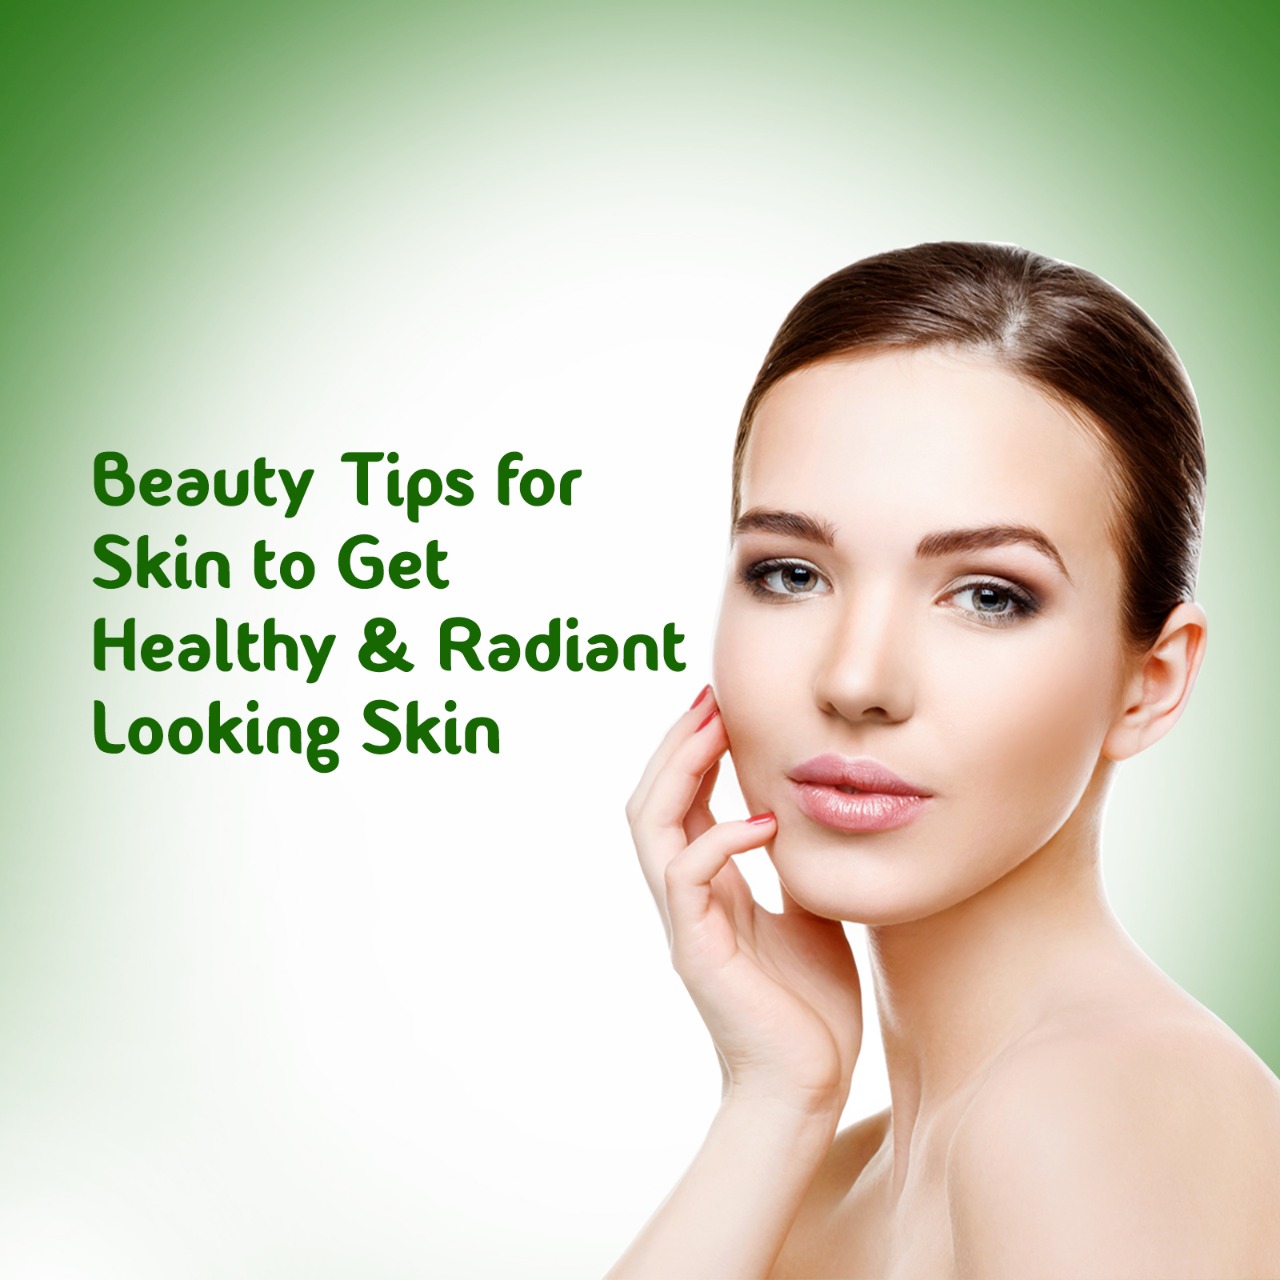 Beauty Tips for Skin to Get Healthy and Radiant Looking Skin